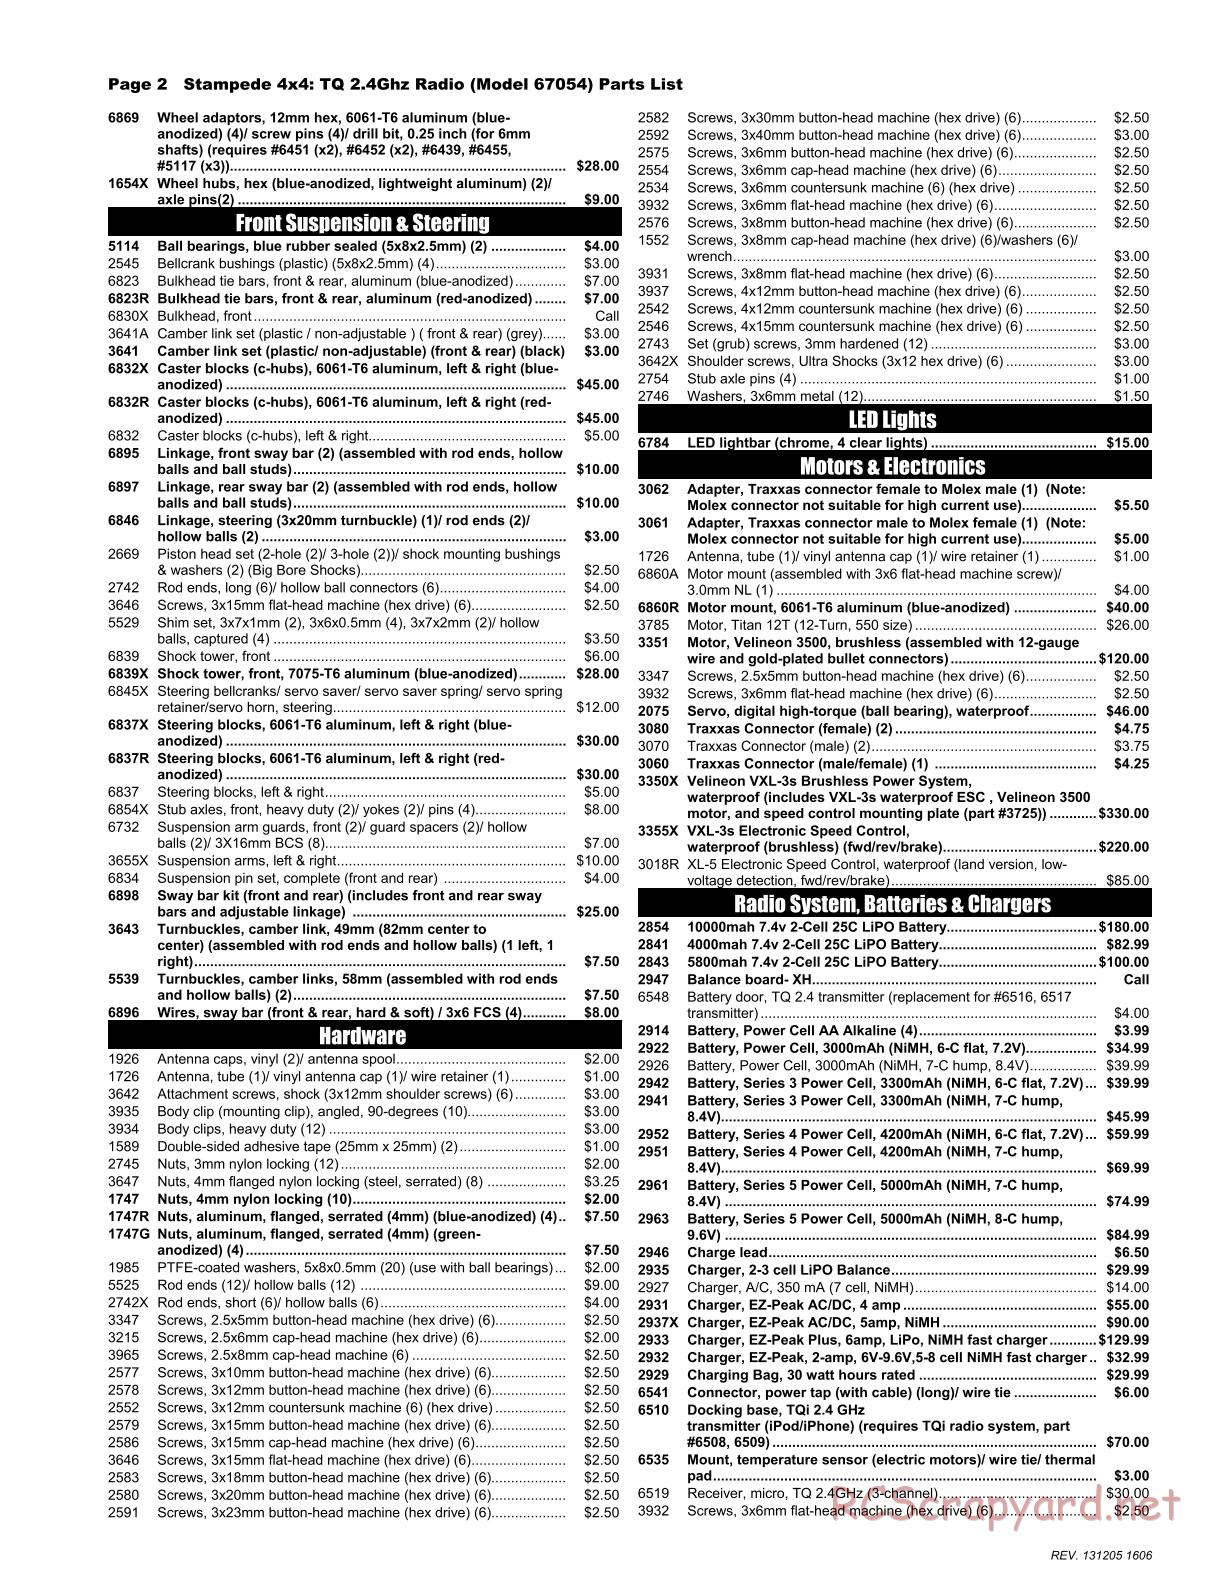 Traxxas - Stampede 4x4 (2013) - Parts List - Page 2